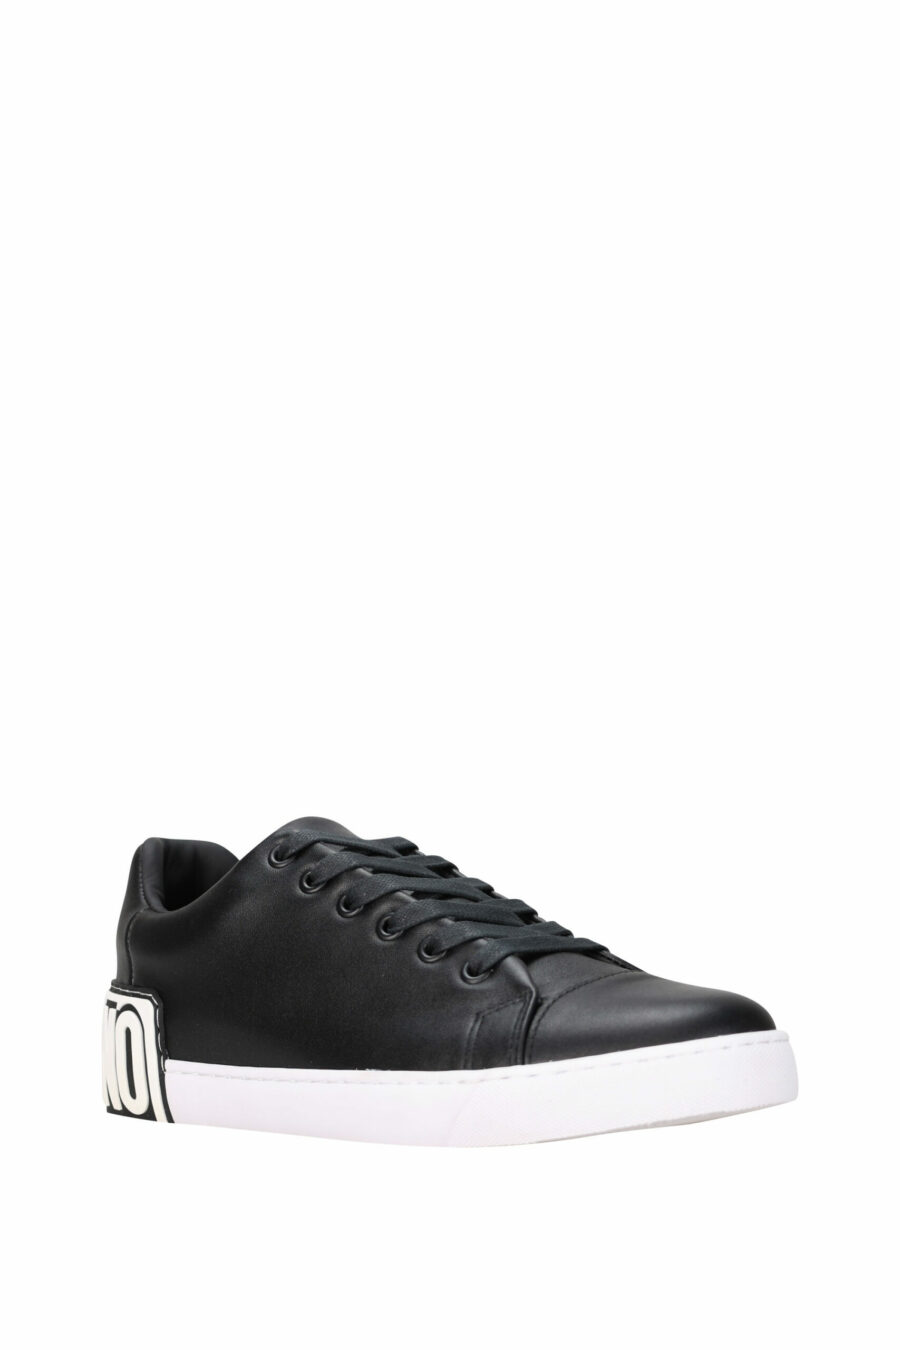 Black trainers "vulc25" with white sole and rubber logo on the back - 8054388585958 1 scaled